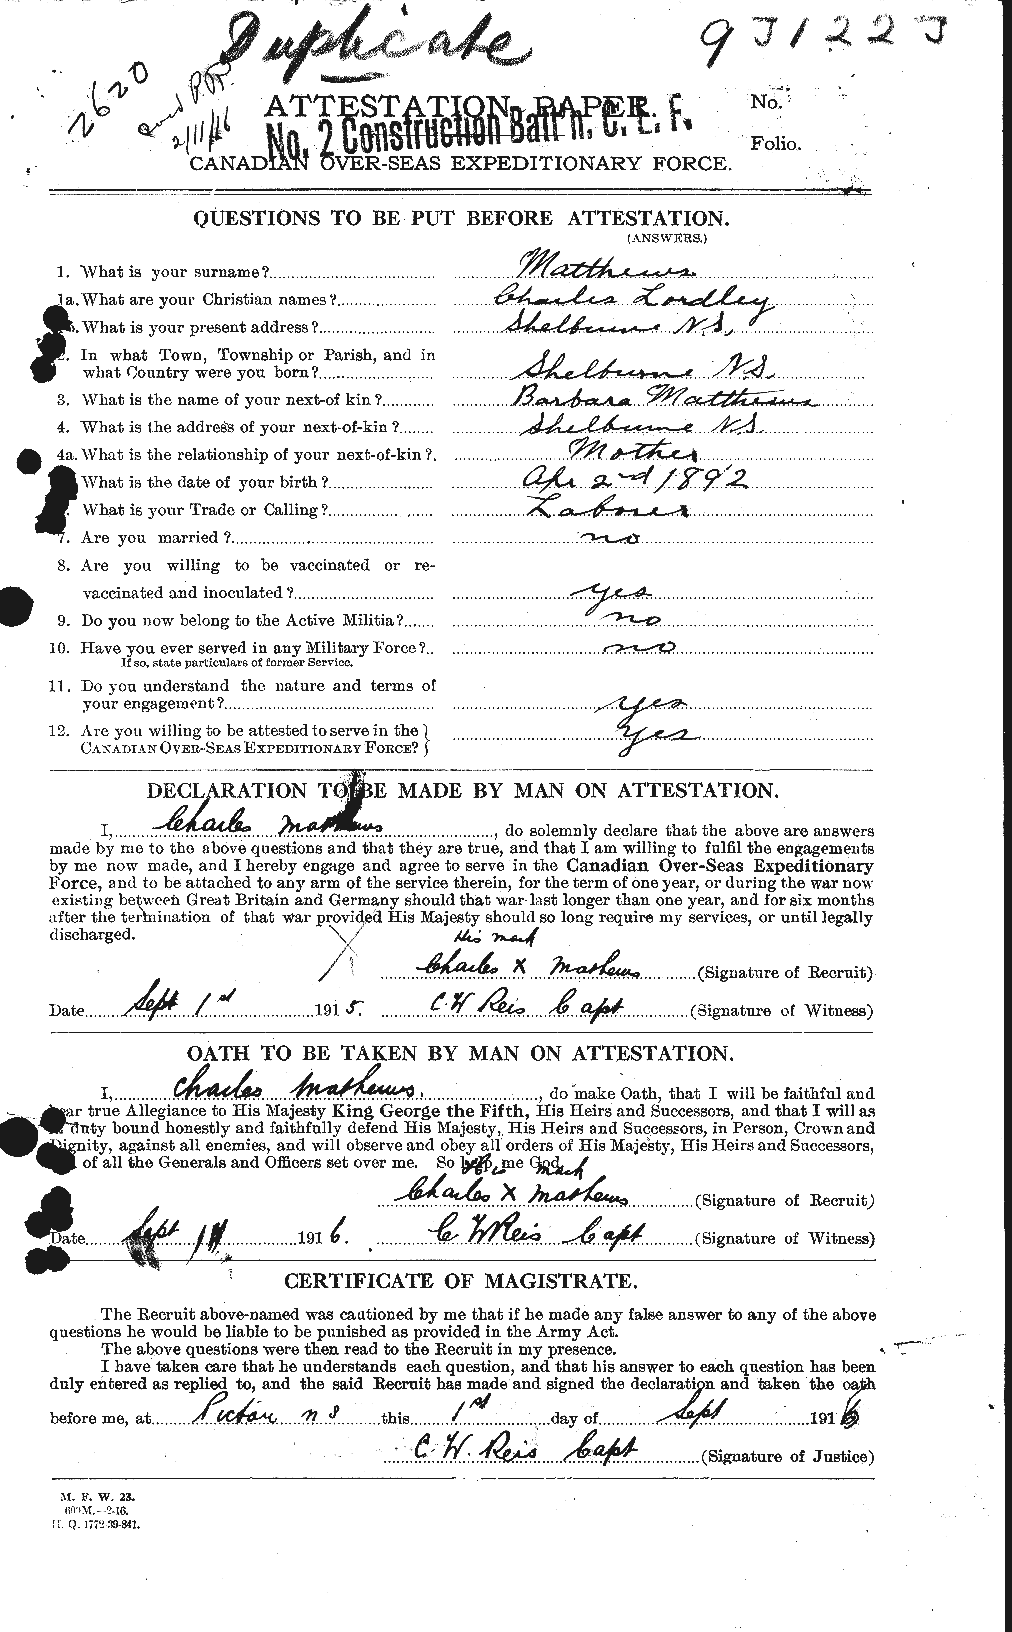 Personnel Records of the First World War - CEF 491023a